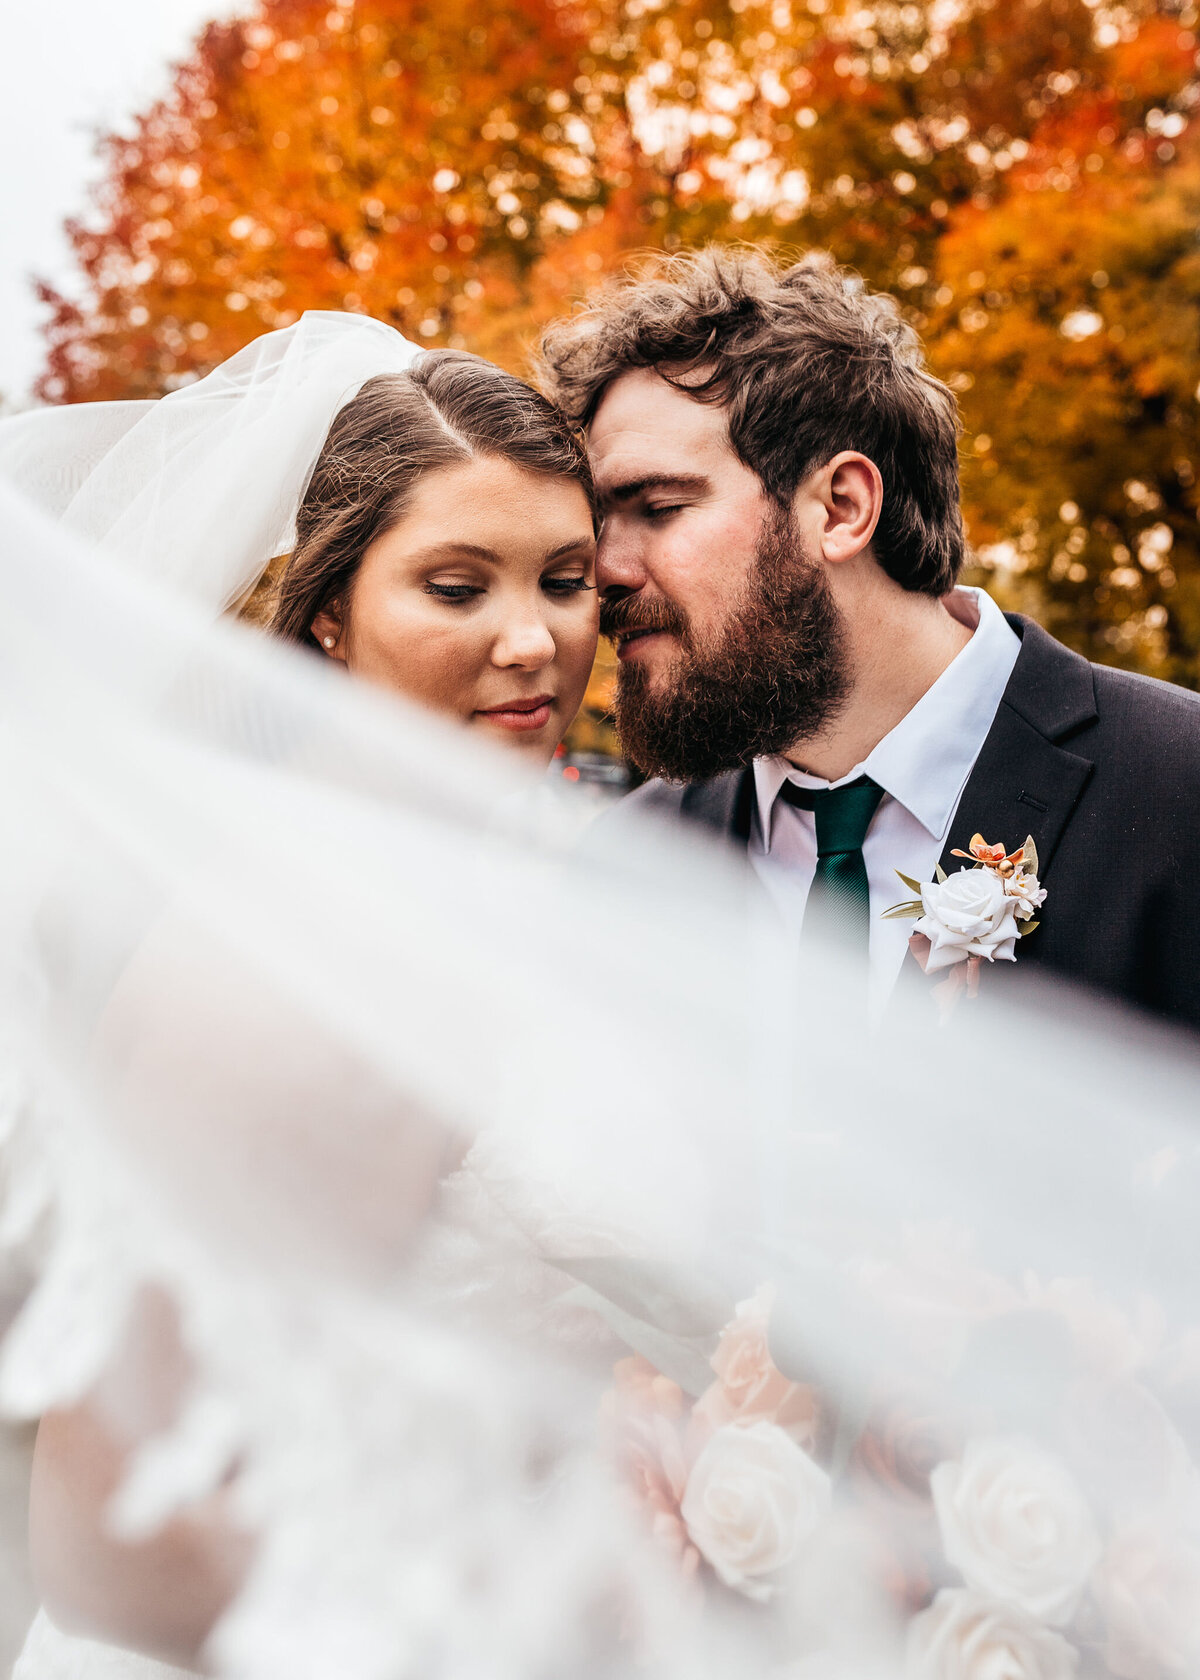 Bridal vail sweeping past couple as they have an intimate moment together in fall wedding at DoubleTree by Hilton hotel in Manchester NH by Lisa Smith Photography